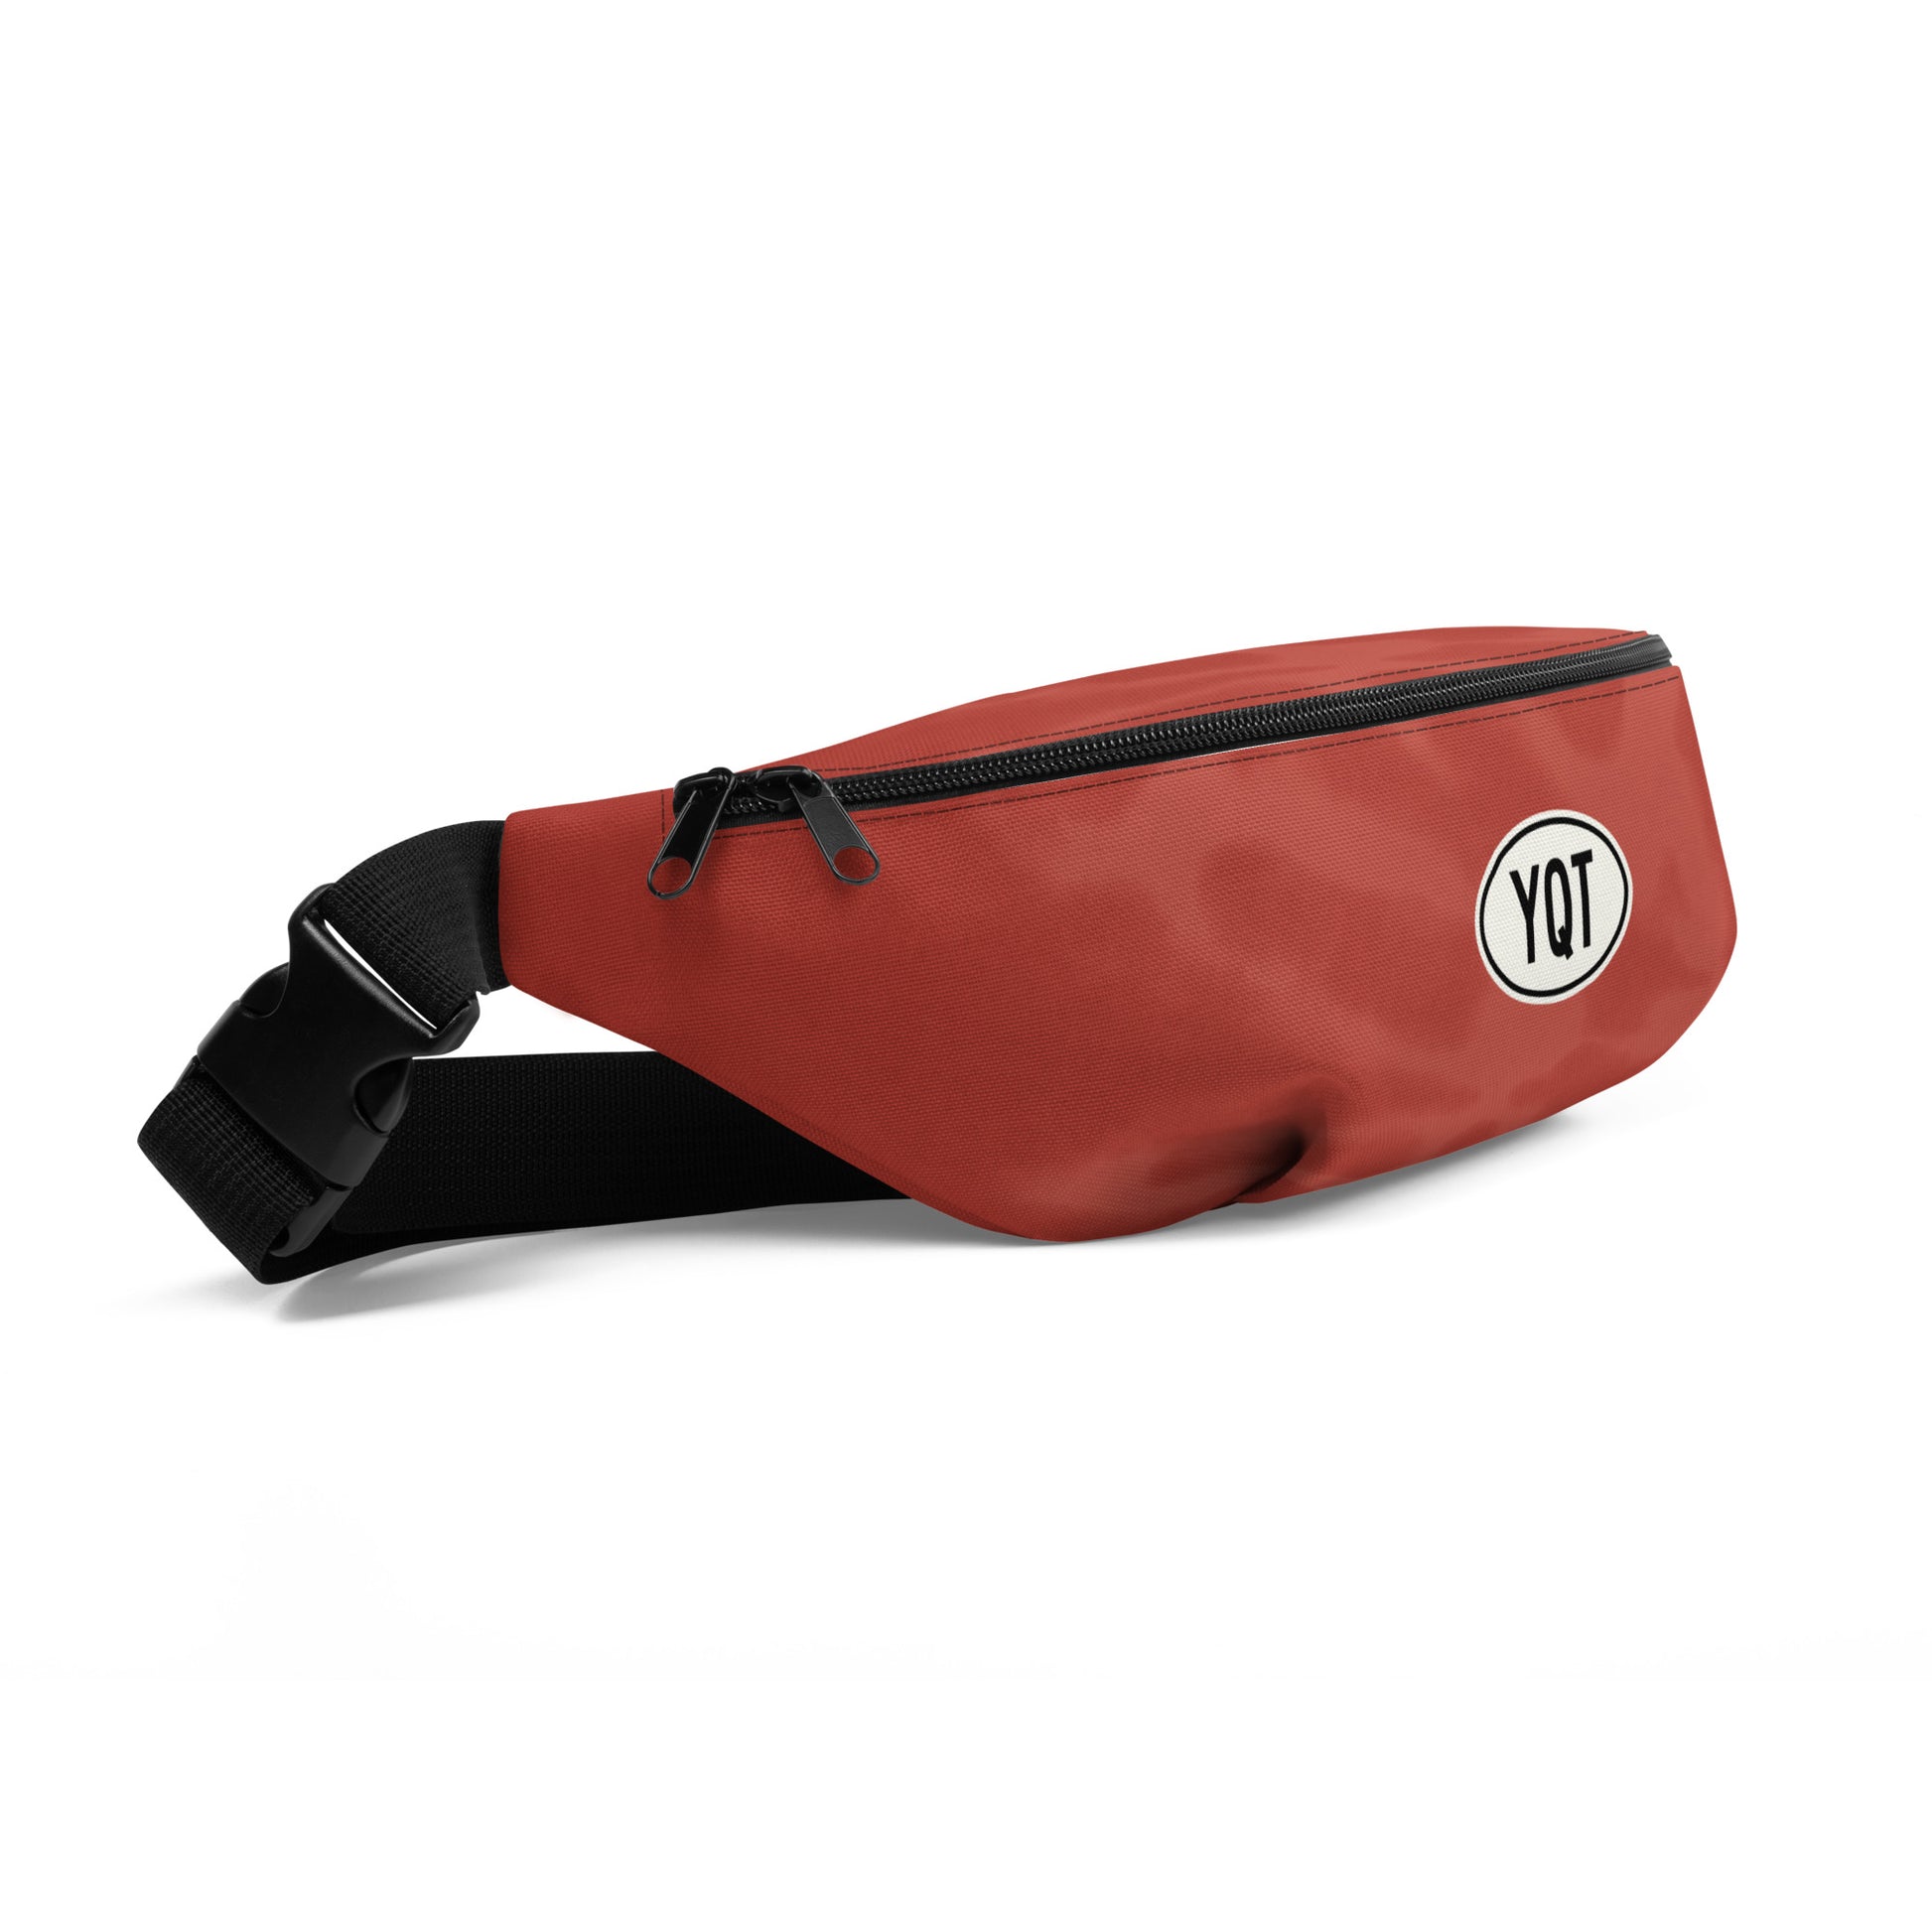 Travel Gift Fanny Pack - Red Tie-Dye • YQT Thunder Bay • YHM Designs - Image 07